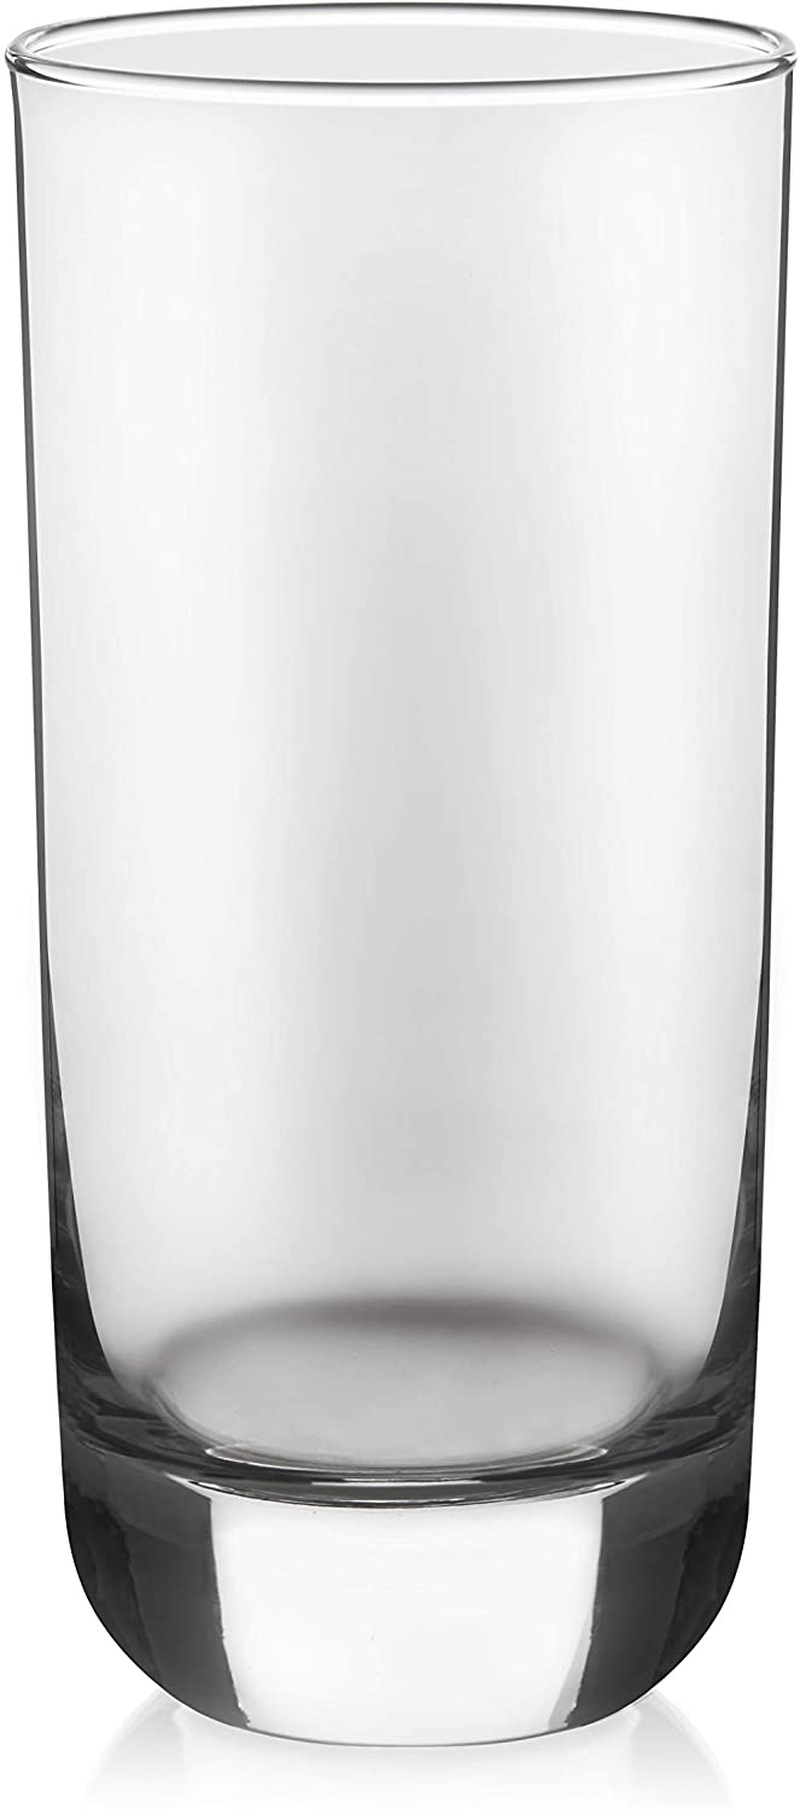 Libbey Polaris 16-Piece Tumbler and Rocks Glass Set, Clear Home & Garden > Kitchen & Dining > Tableware > Drinkware Libbey   